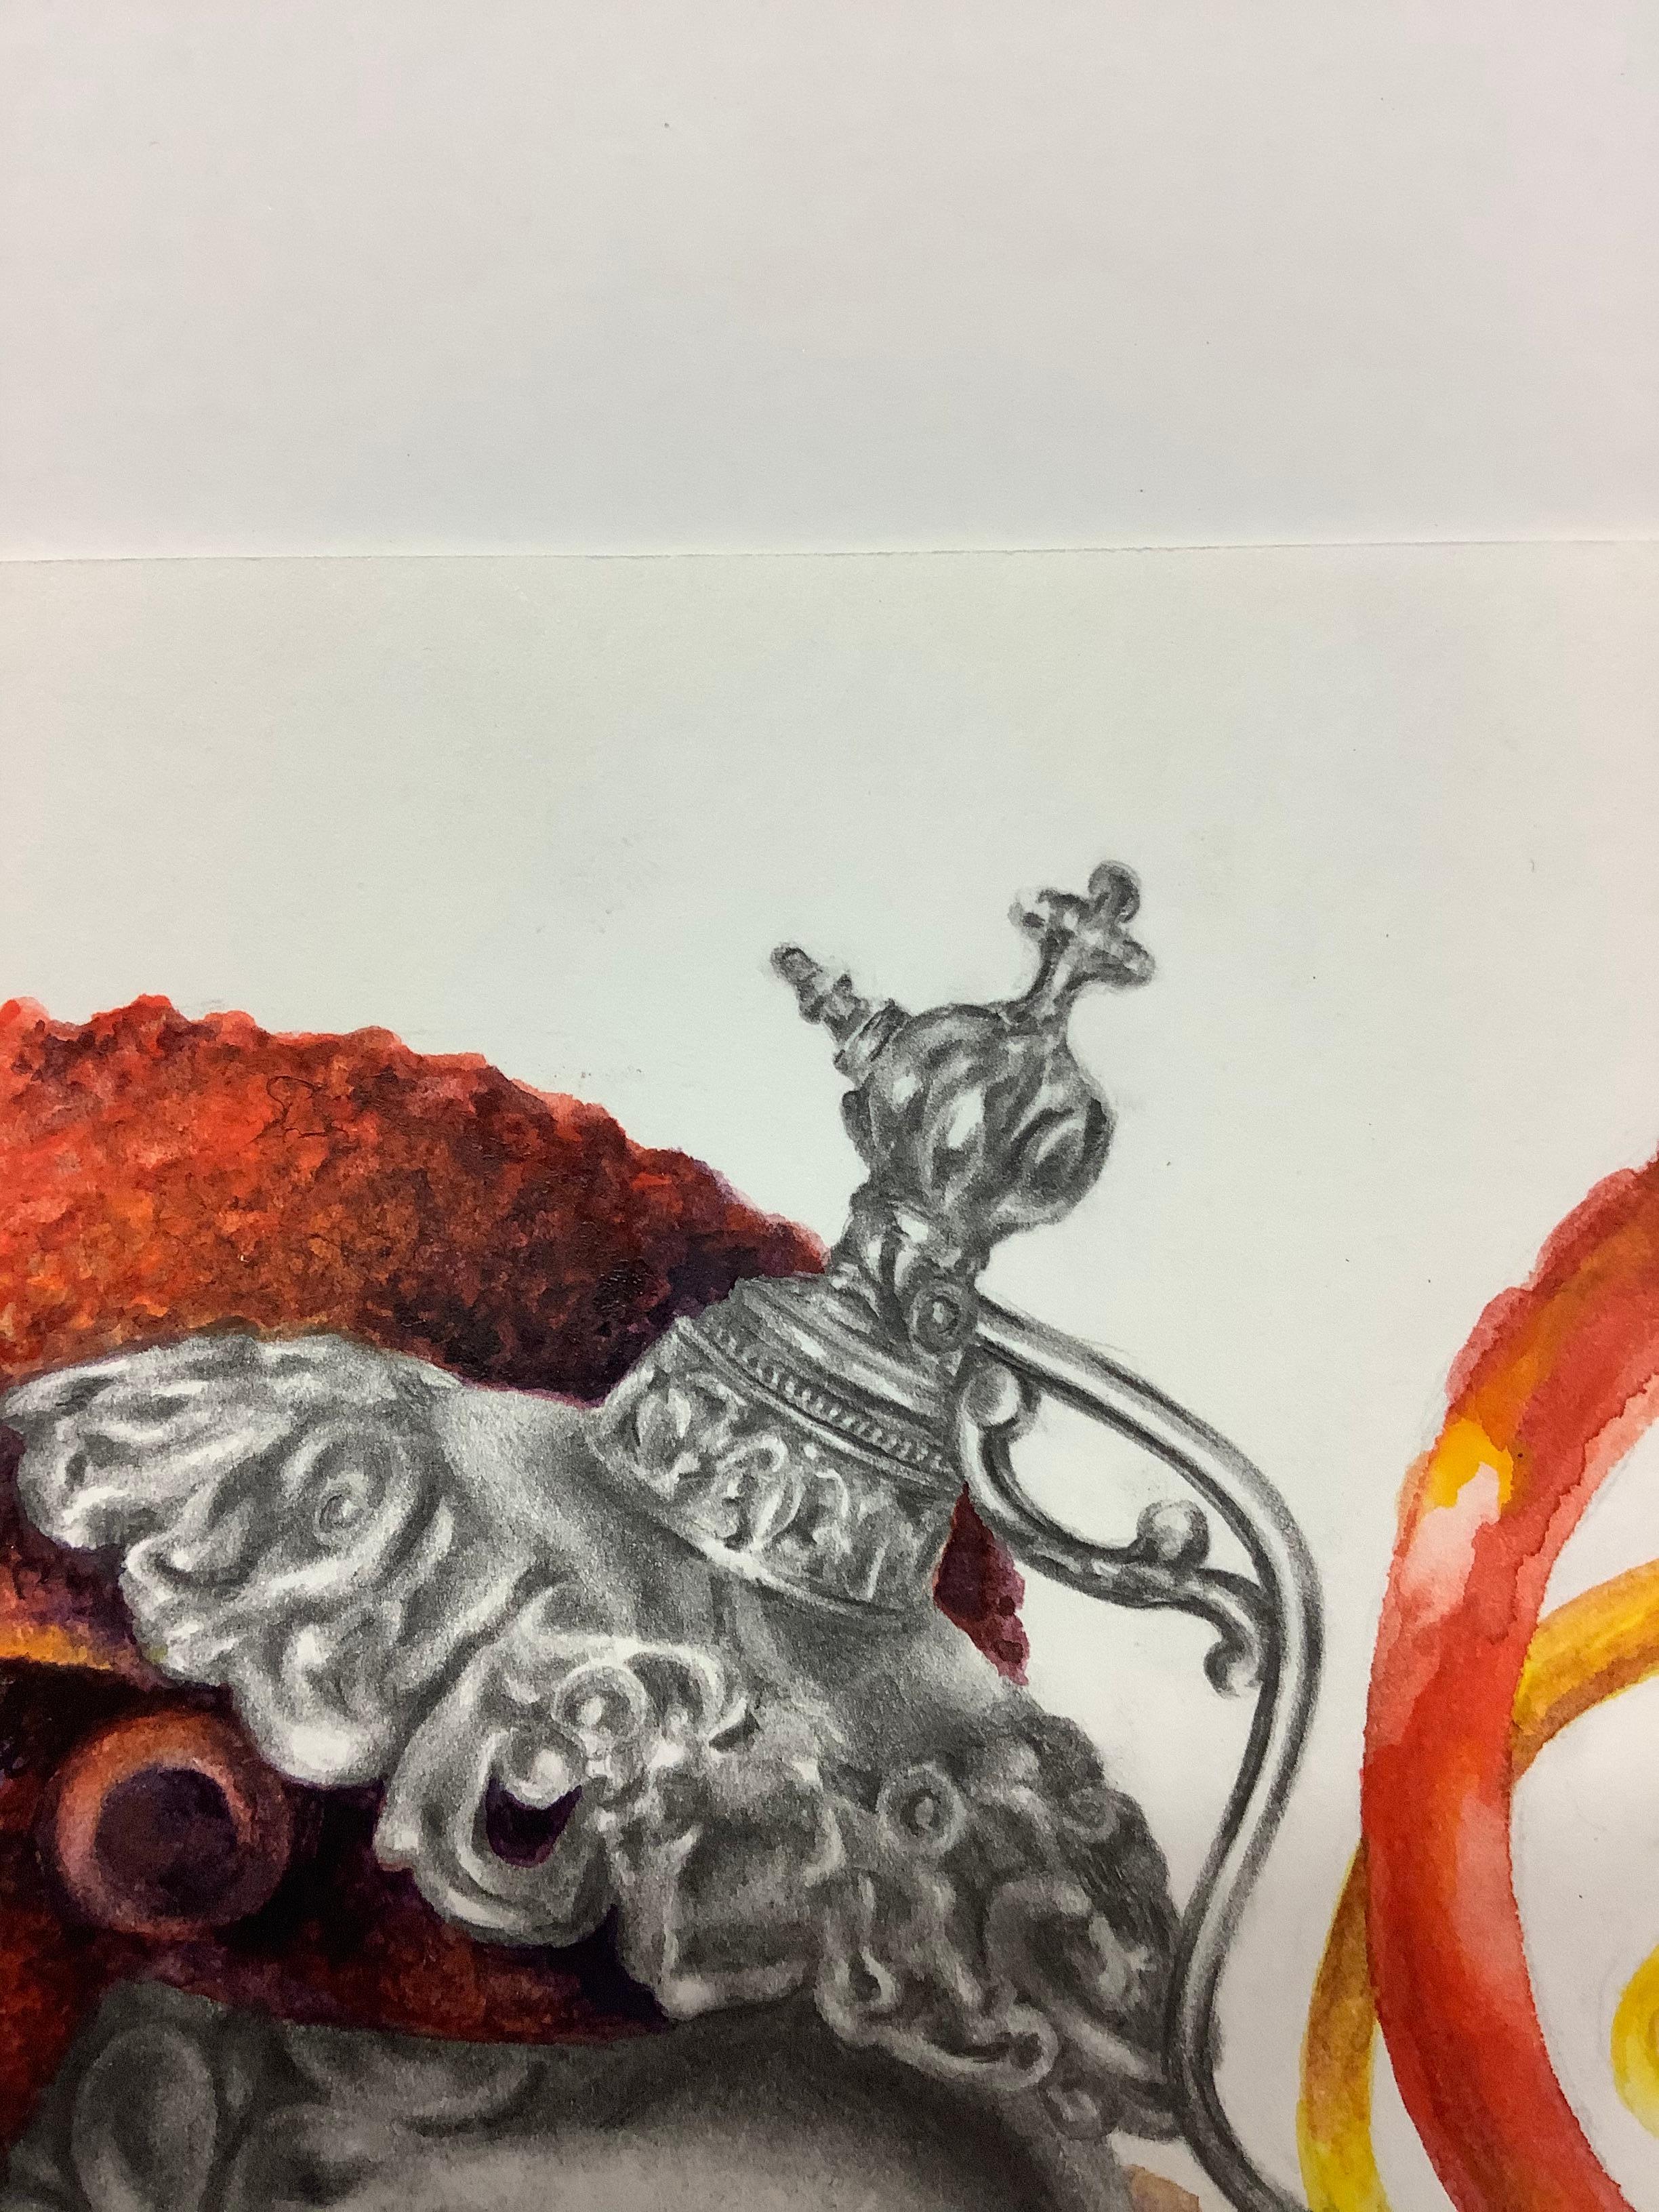 Perfume No. One, Drawing of Orange, Red Octopus and Perfume Bottle on White - Contemporary Art by Francine Fox